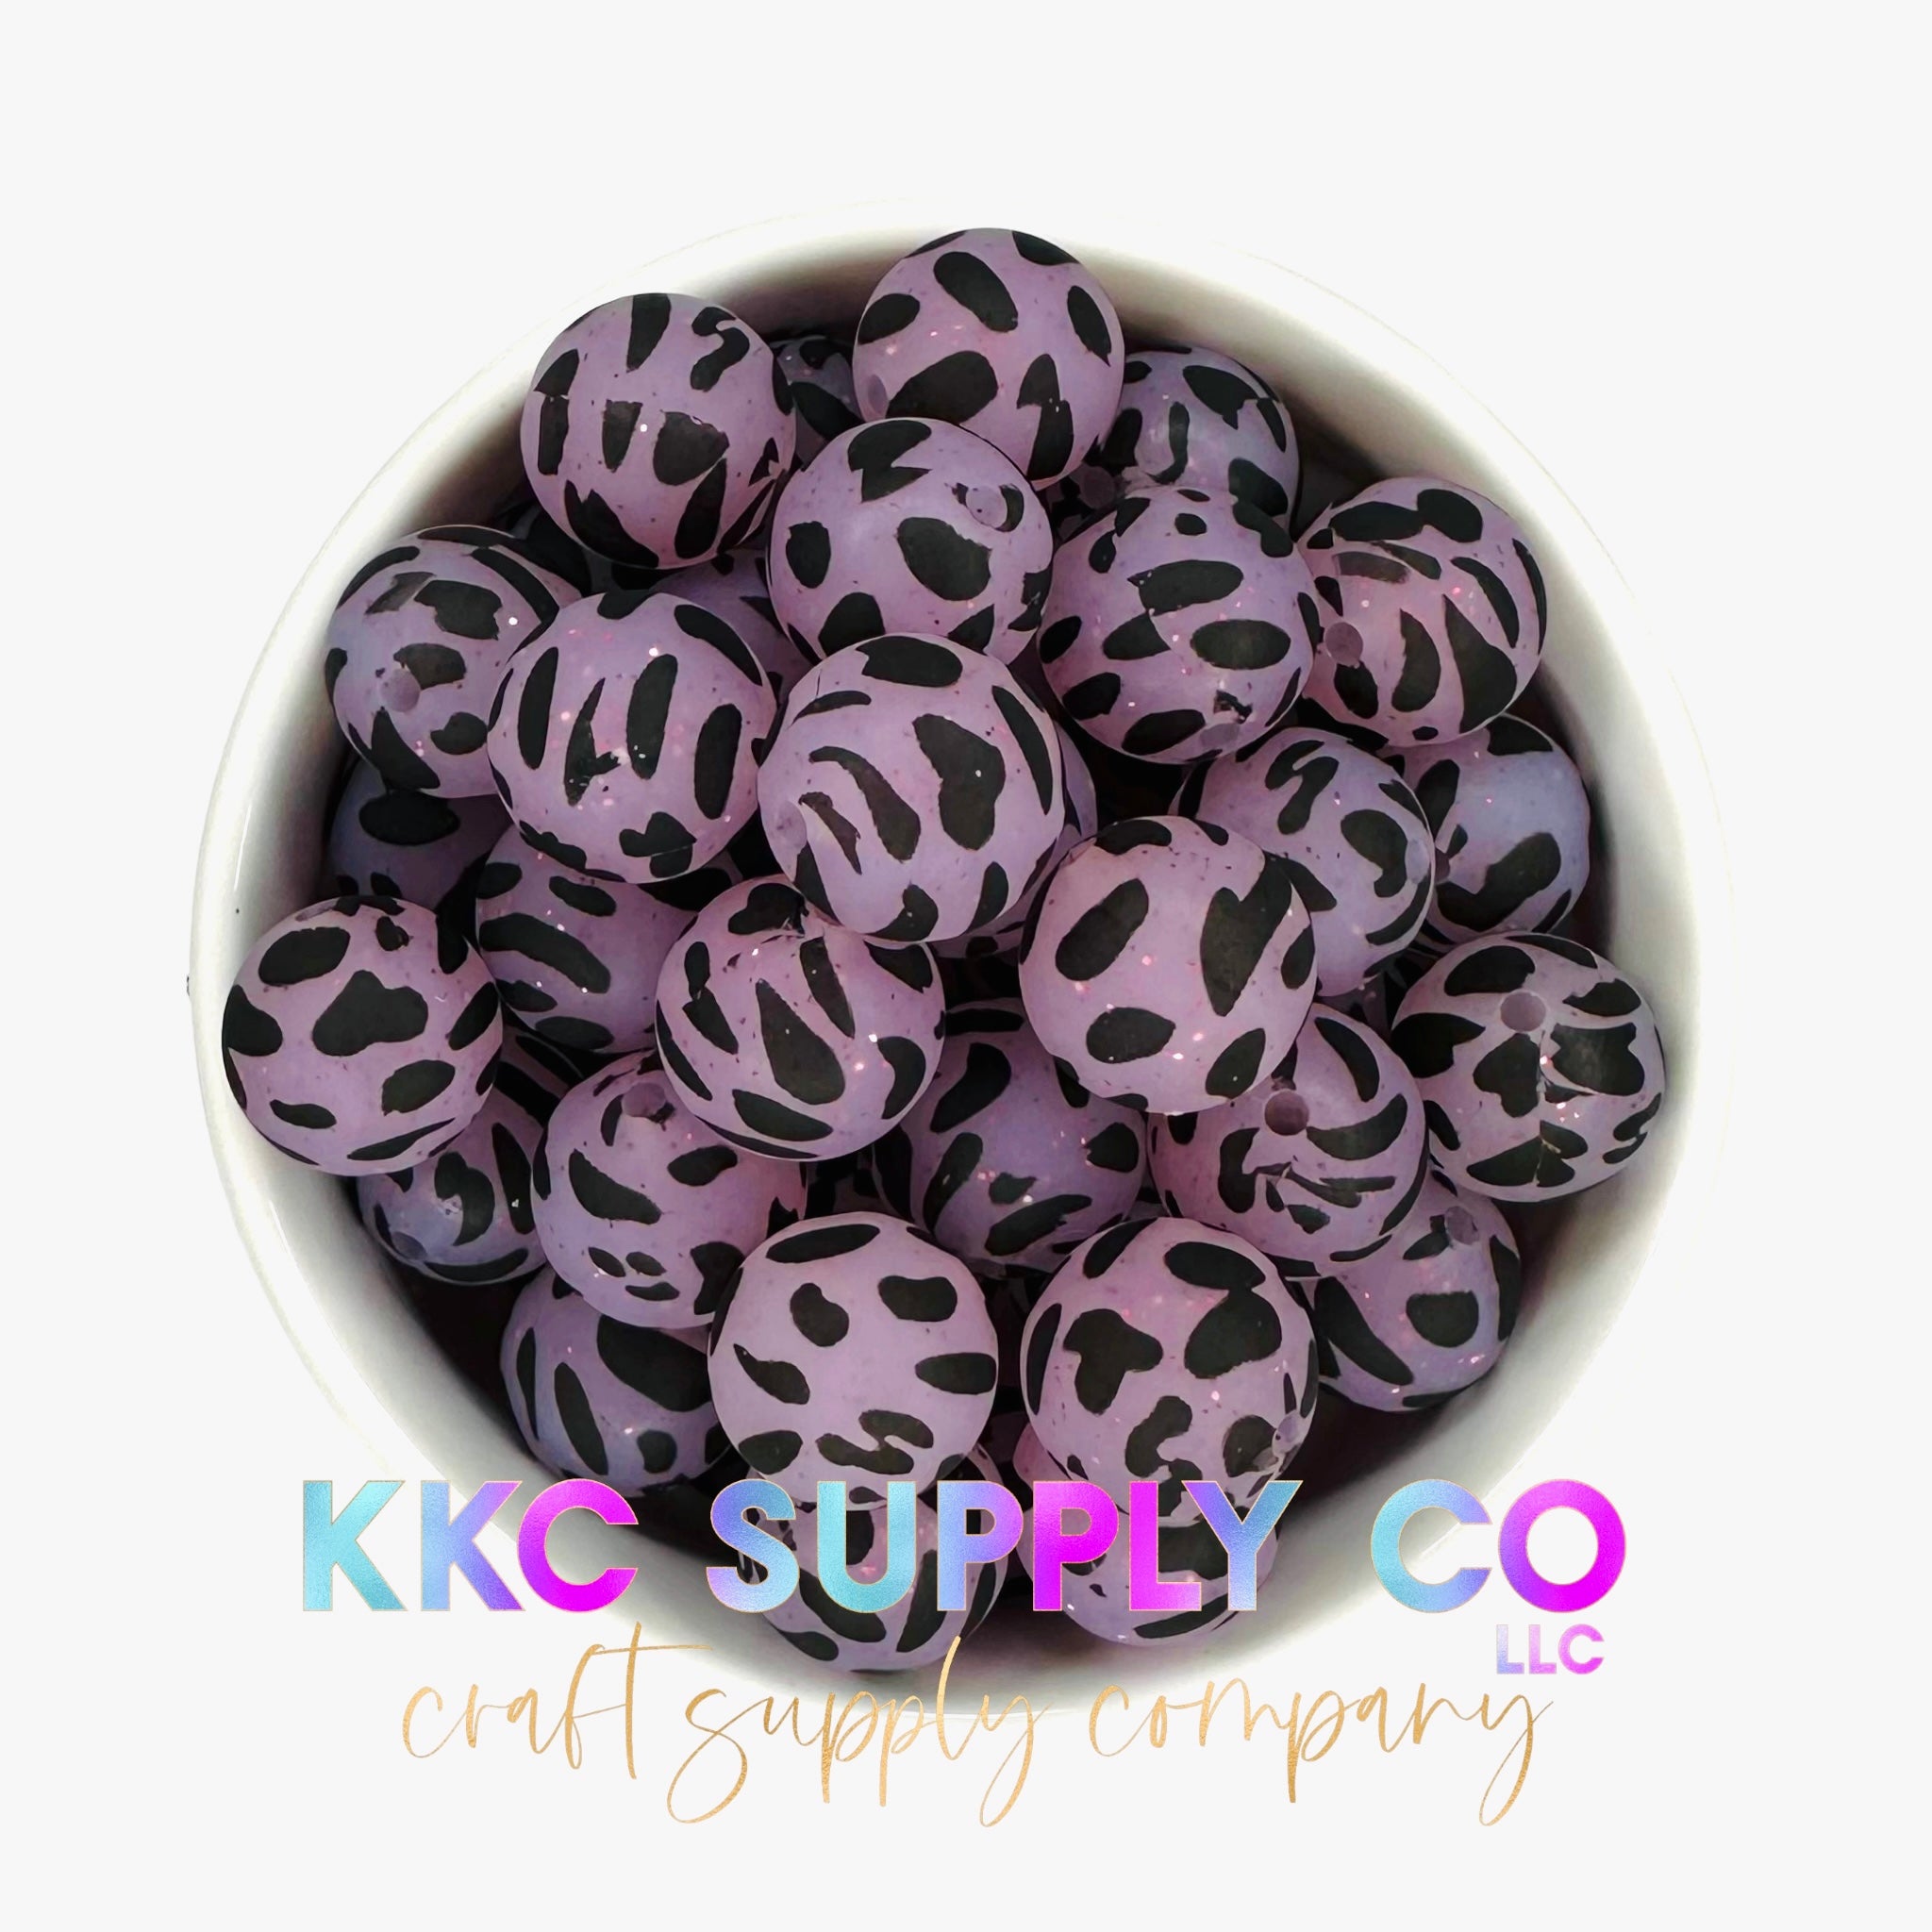 Pack of 5- 15 mm Silicone Beads, Cow Print, Craft Silicone Beads, Food  Grade Silicone Beads, Dalmatian print beads